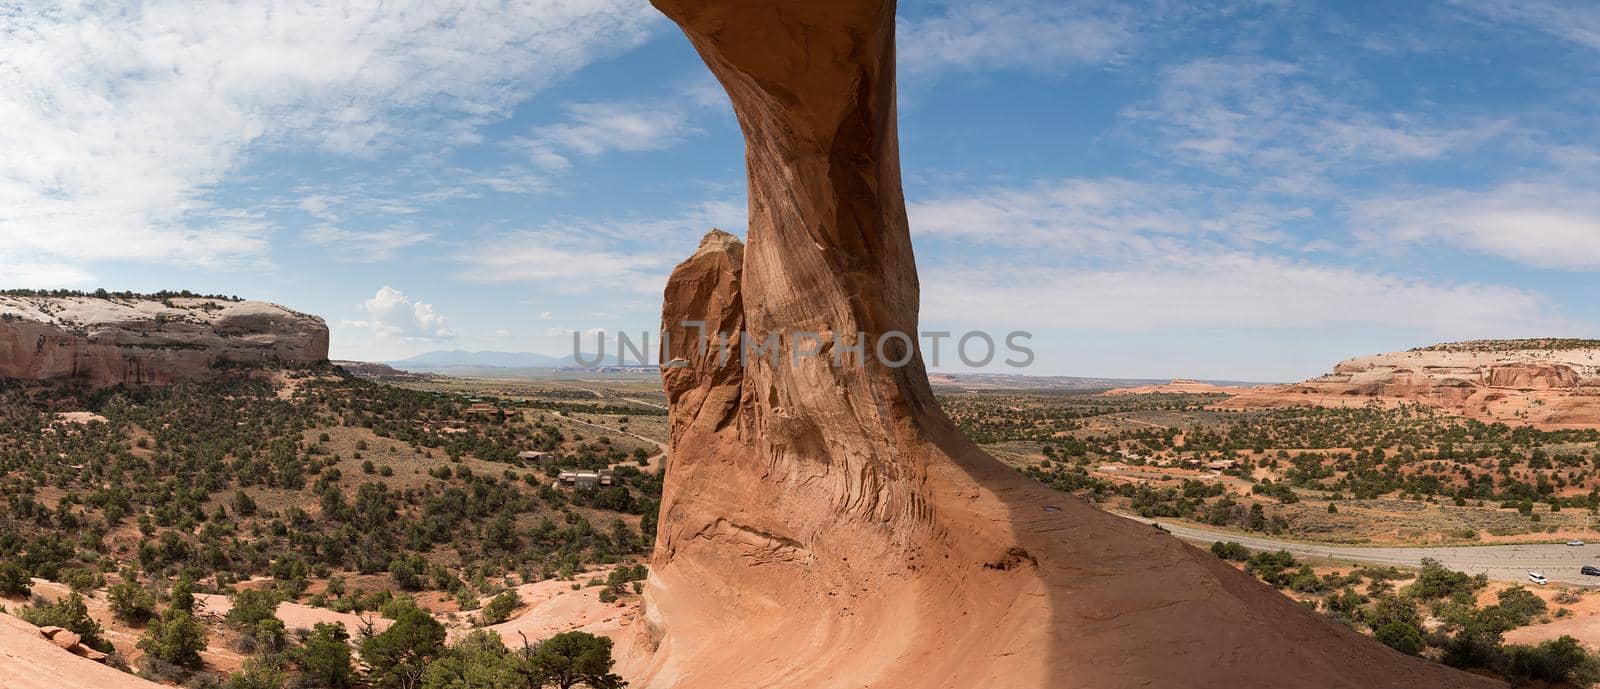 Utah panorama of inside of giant arch arm at Arches National Park